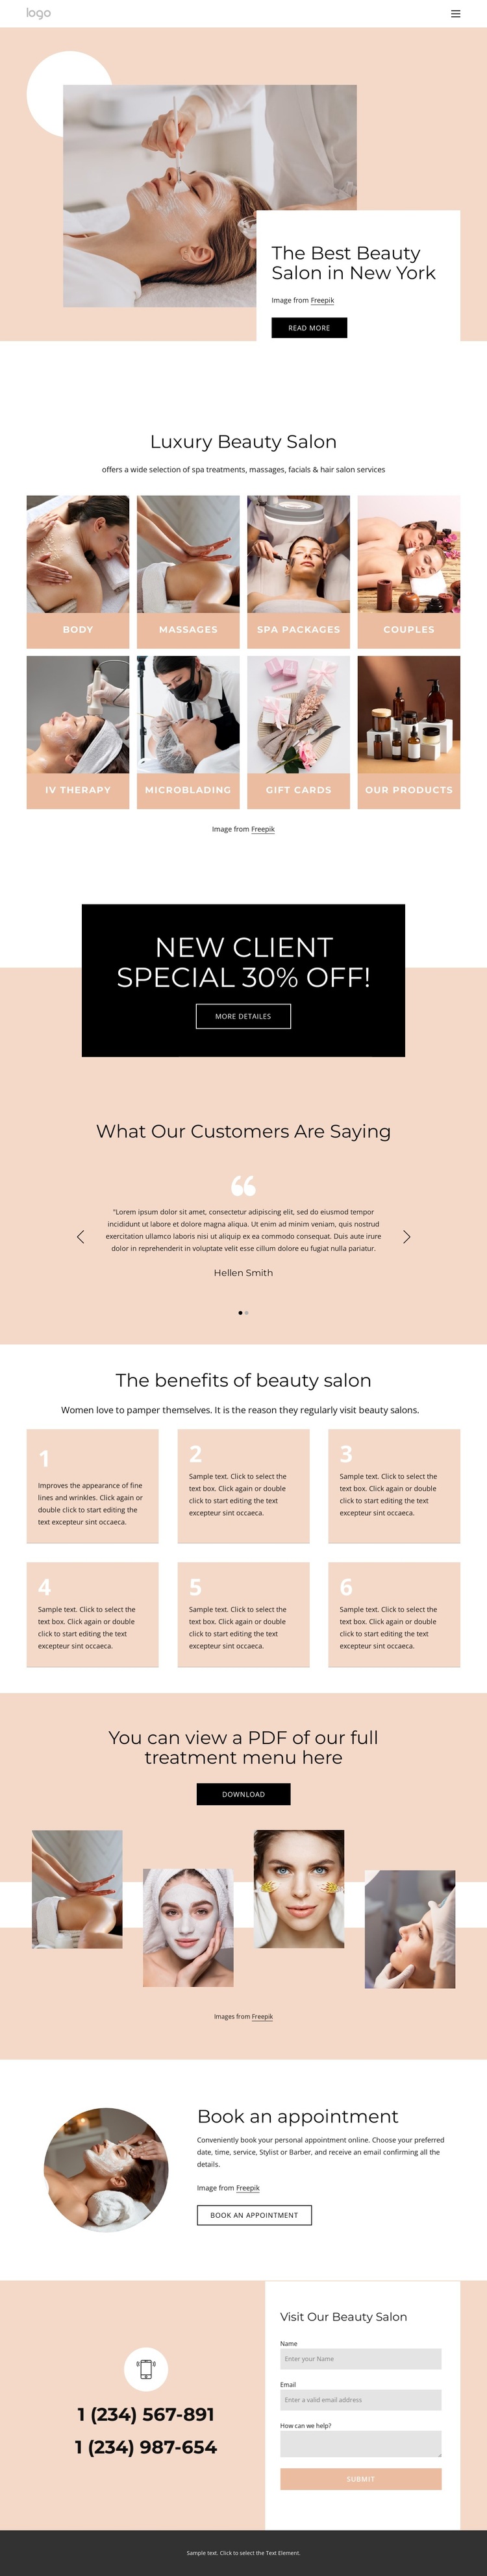 The best beauty salon in NYC Template